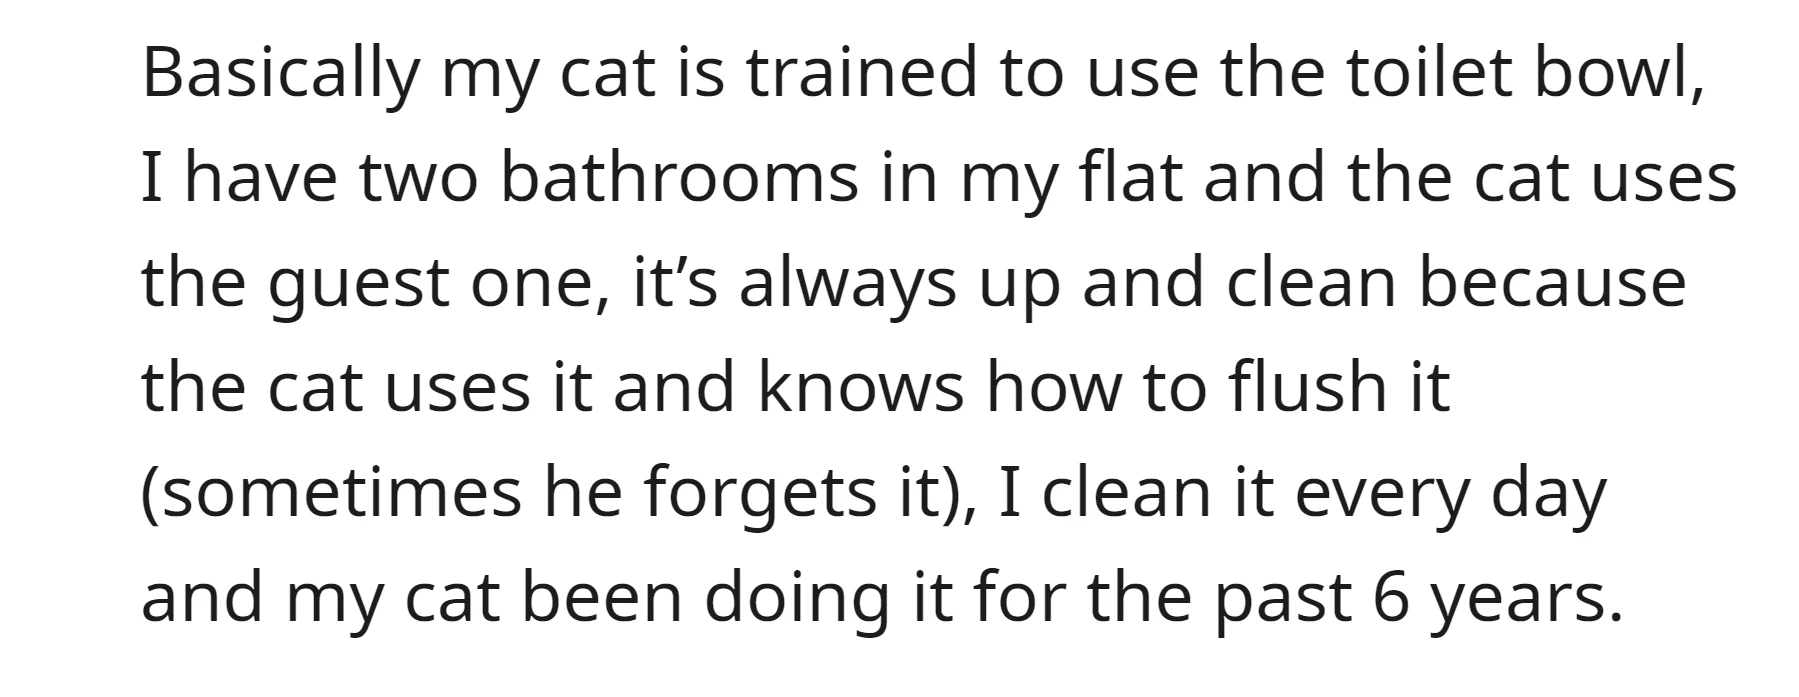 OP's cat, trained over the past 6 years, consistently uses the guest bathroom toilet